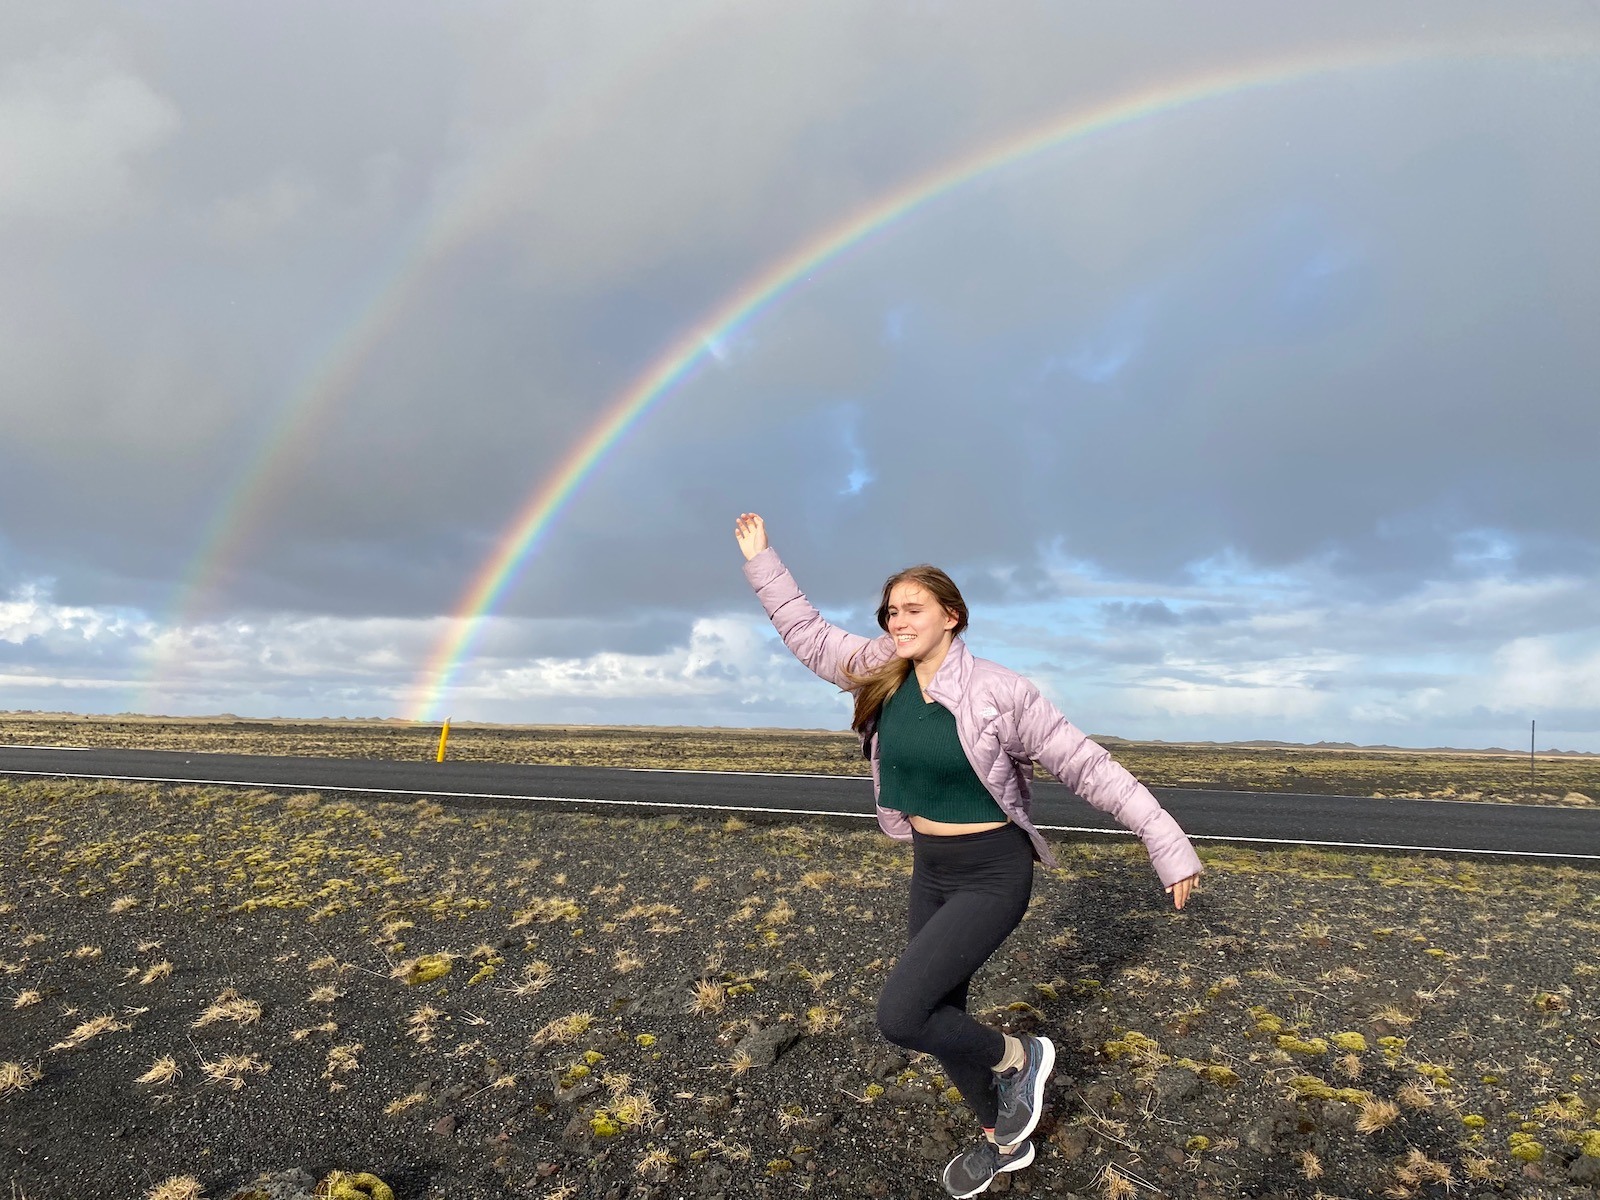 Teen girl in field with double rainbow in the background in Iceland. 